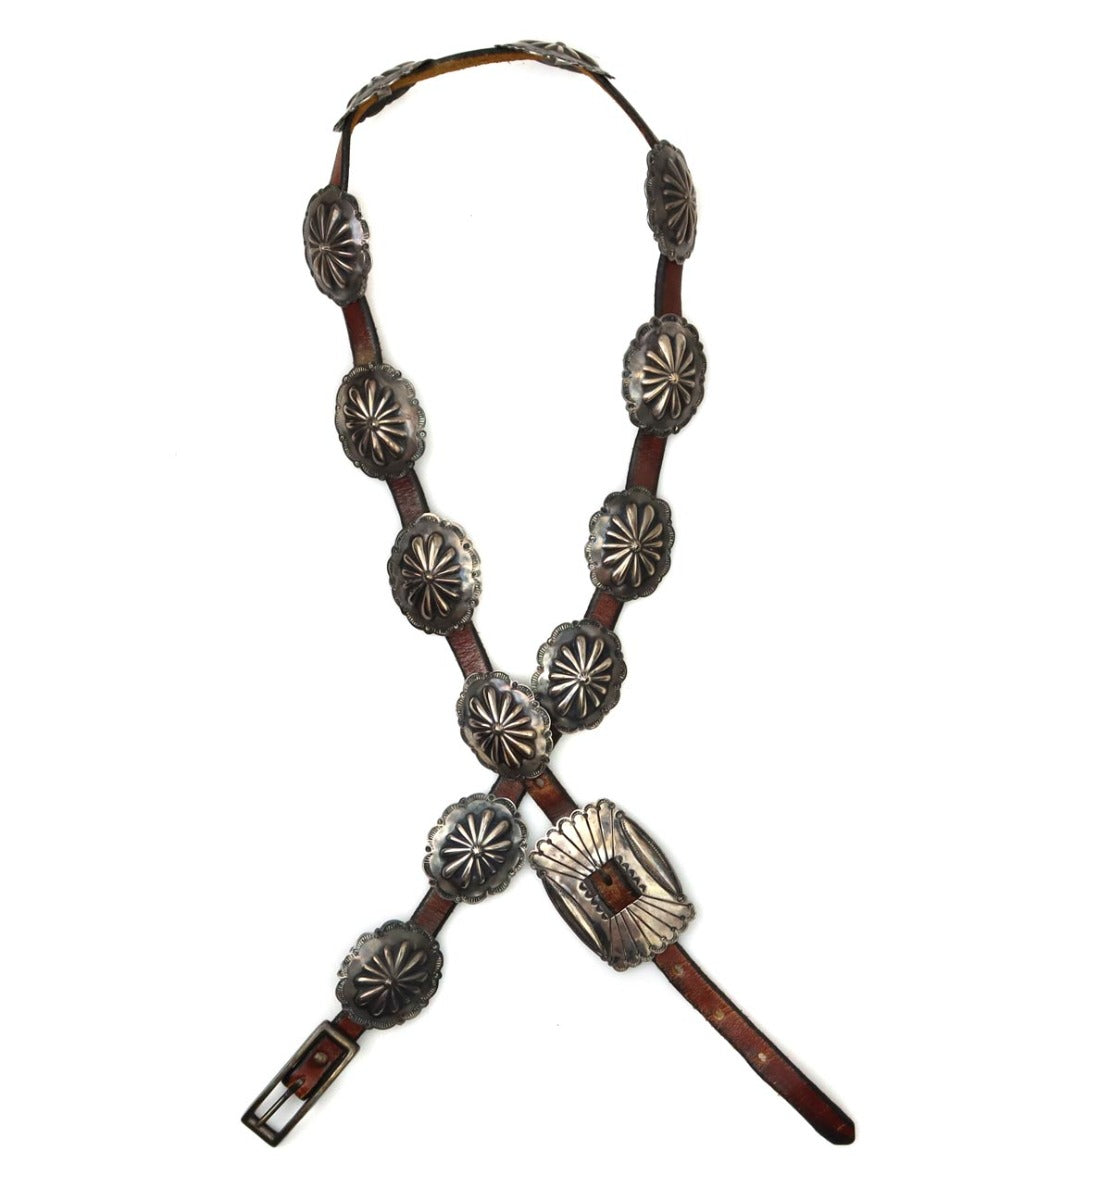 Navajo Sterling Silver and Leather Concho Belt c. 1940s, 29"-34" waist (J91253B-0822-002)
